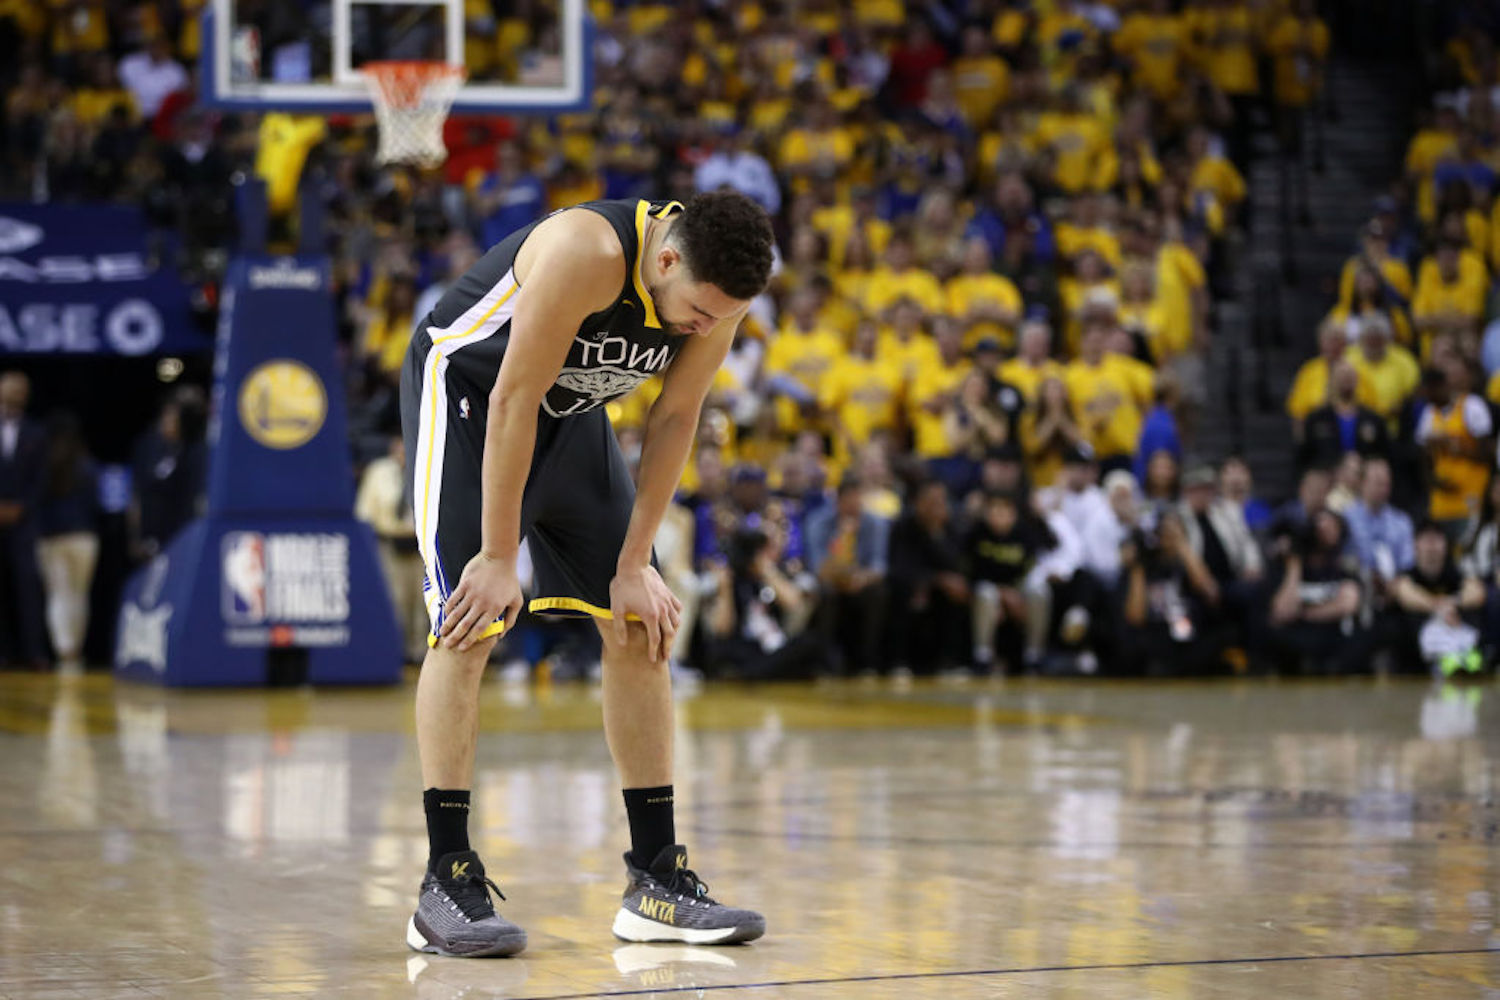 Klay Thompson will miss his second season in a row after tearing his Achilles last month. When will the sharpshooter return from his injury?